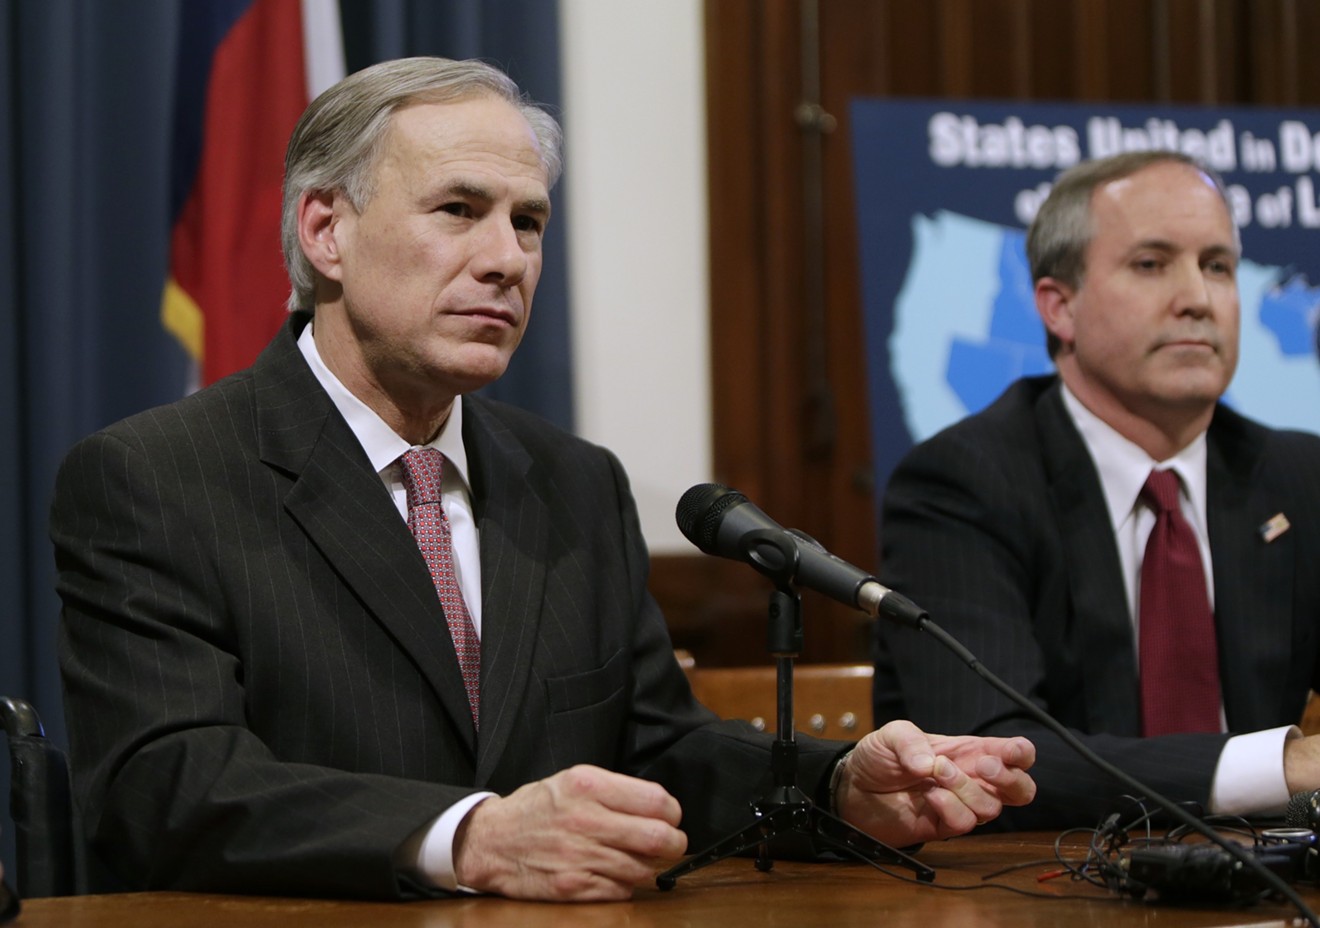 Gov. Greg Abbott and Texas Attorney General Ken Paxton are fighting a watchdog's effort to gain access to records.